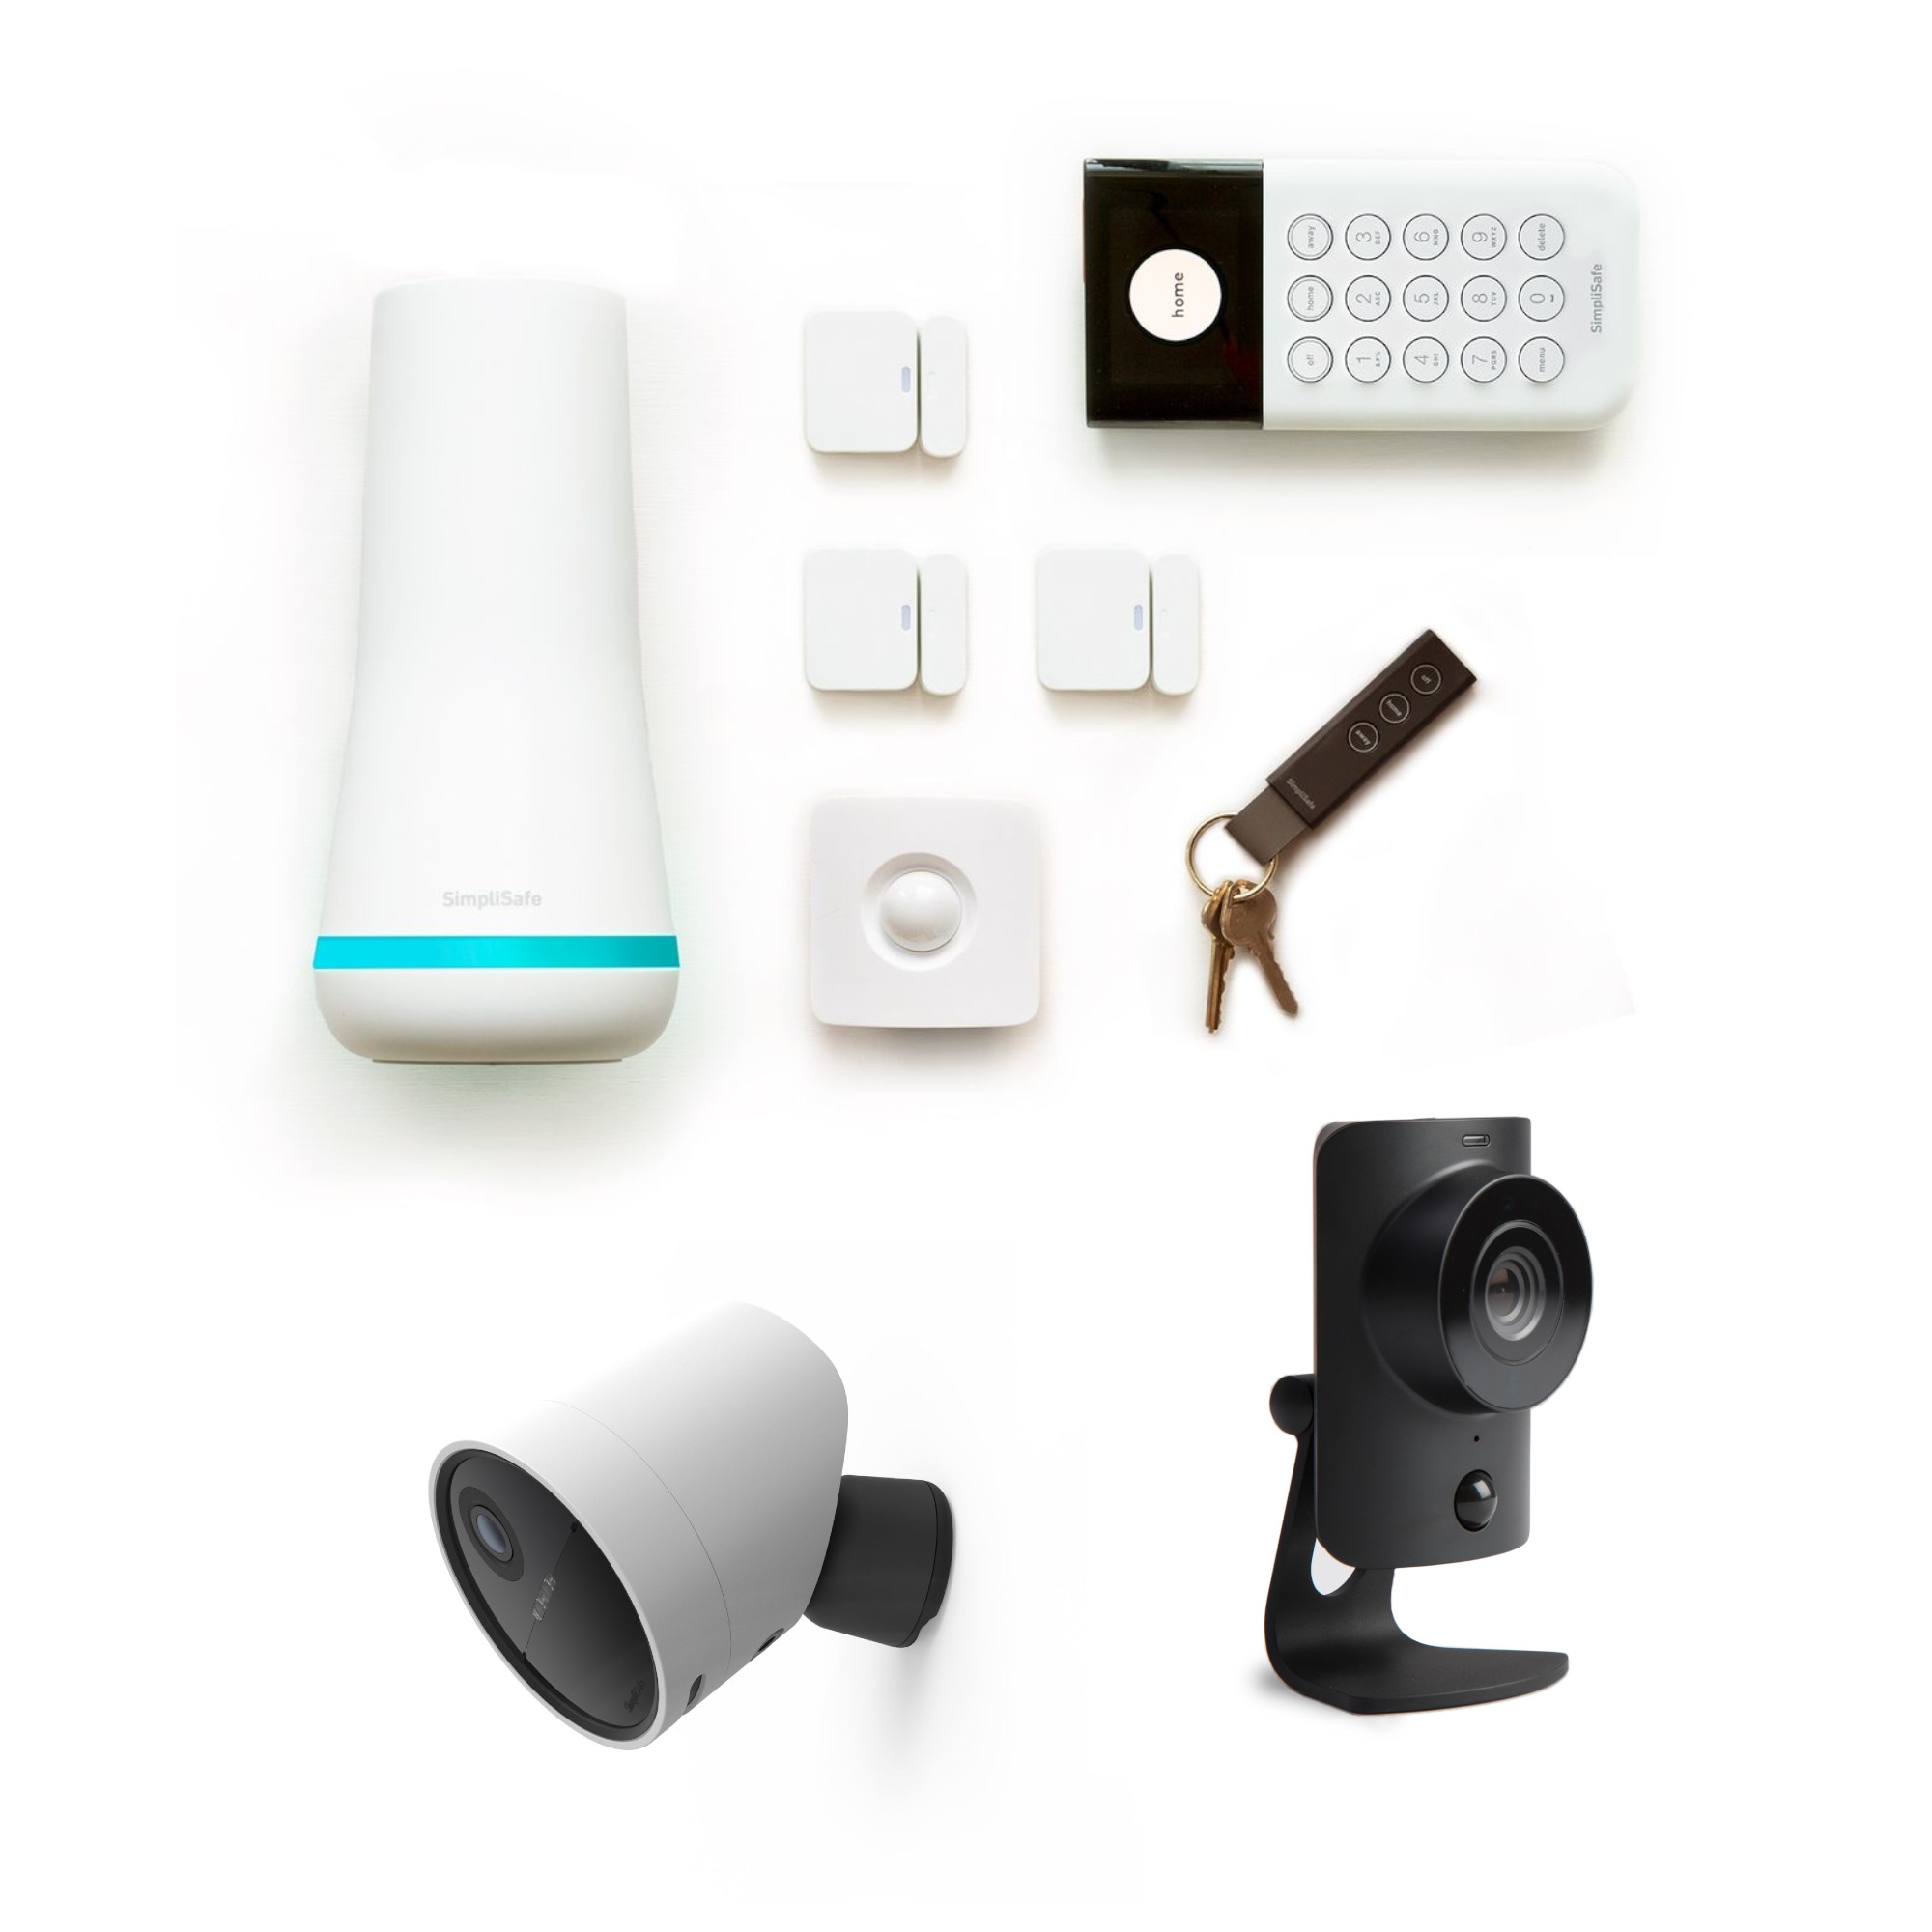 Does Simplicam Work With Old Simplisafe  : Compatibility Guide